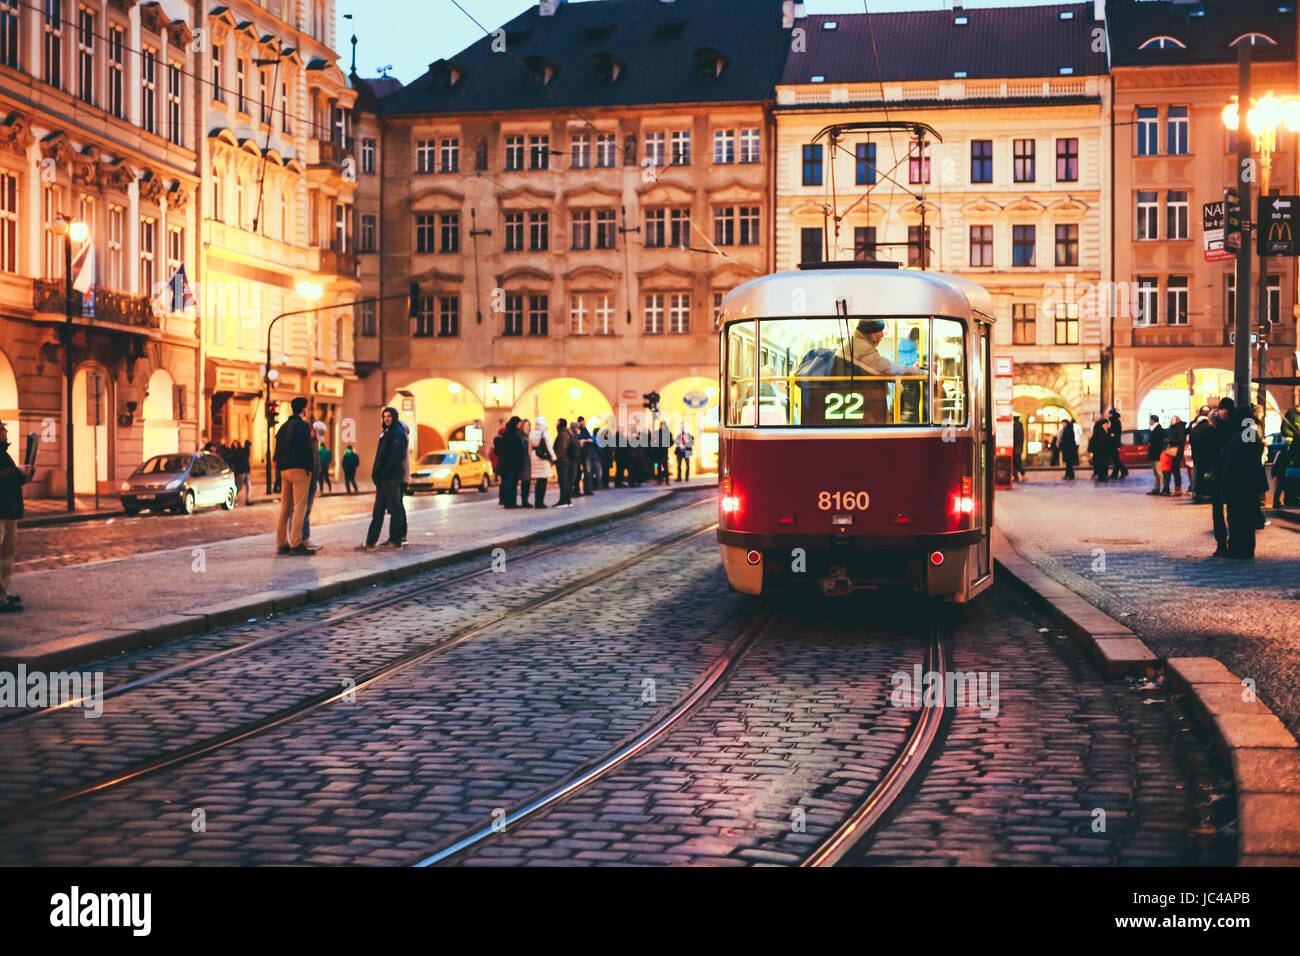 Prague Tram 22 High Resolution Stock Photography and Images - Alamy